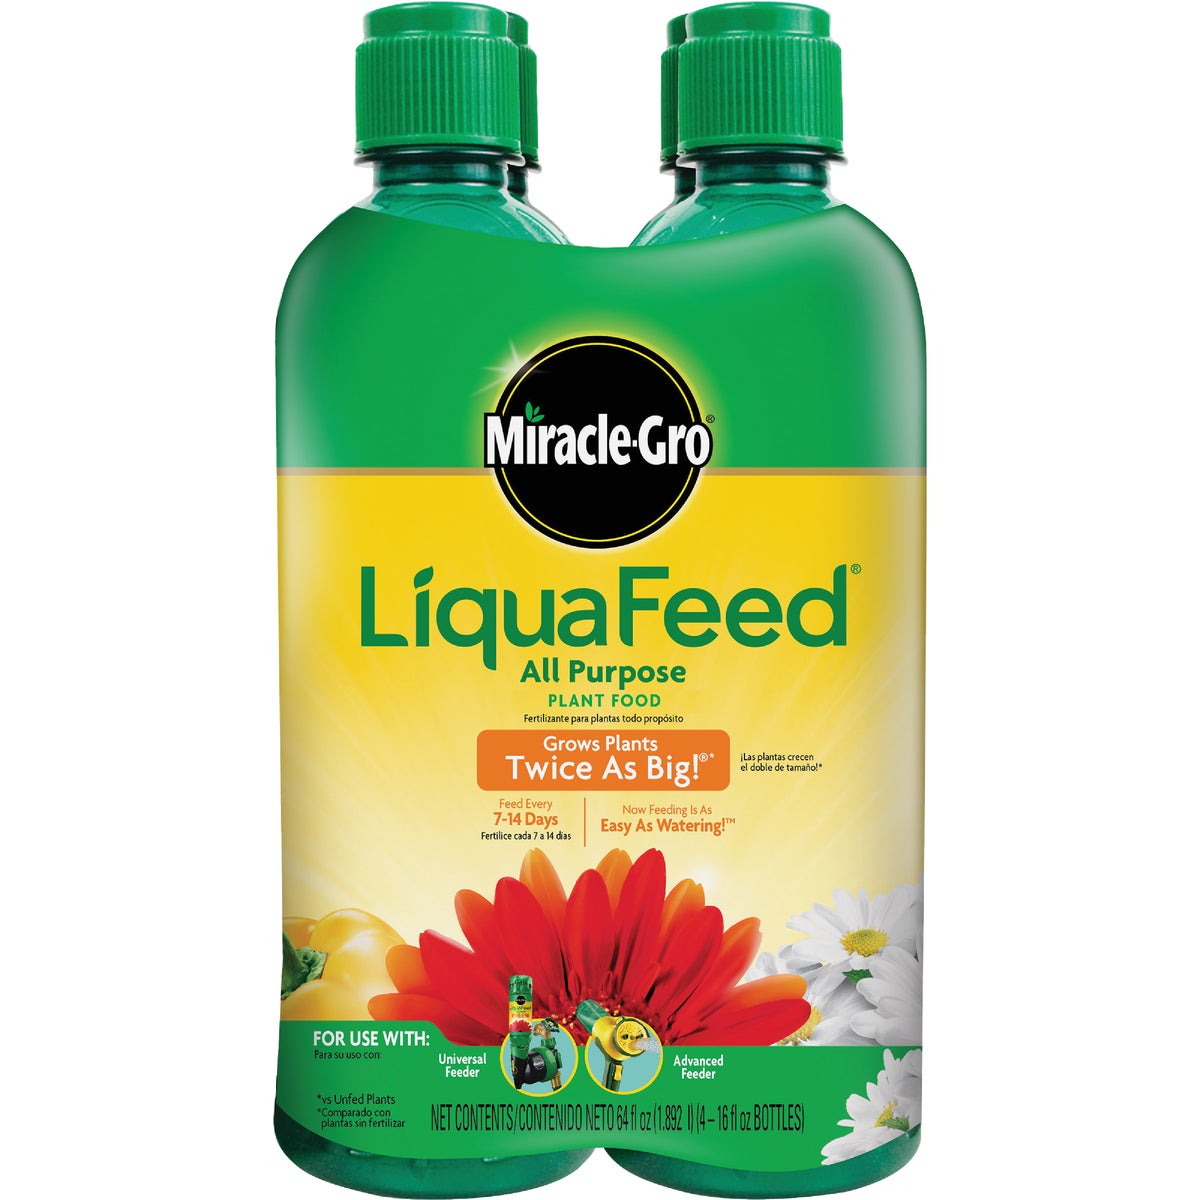 Item 727389, Miracle-Gro all purpose liquid plant food refill for the Miracle-Gro 